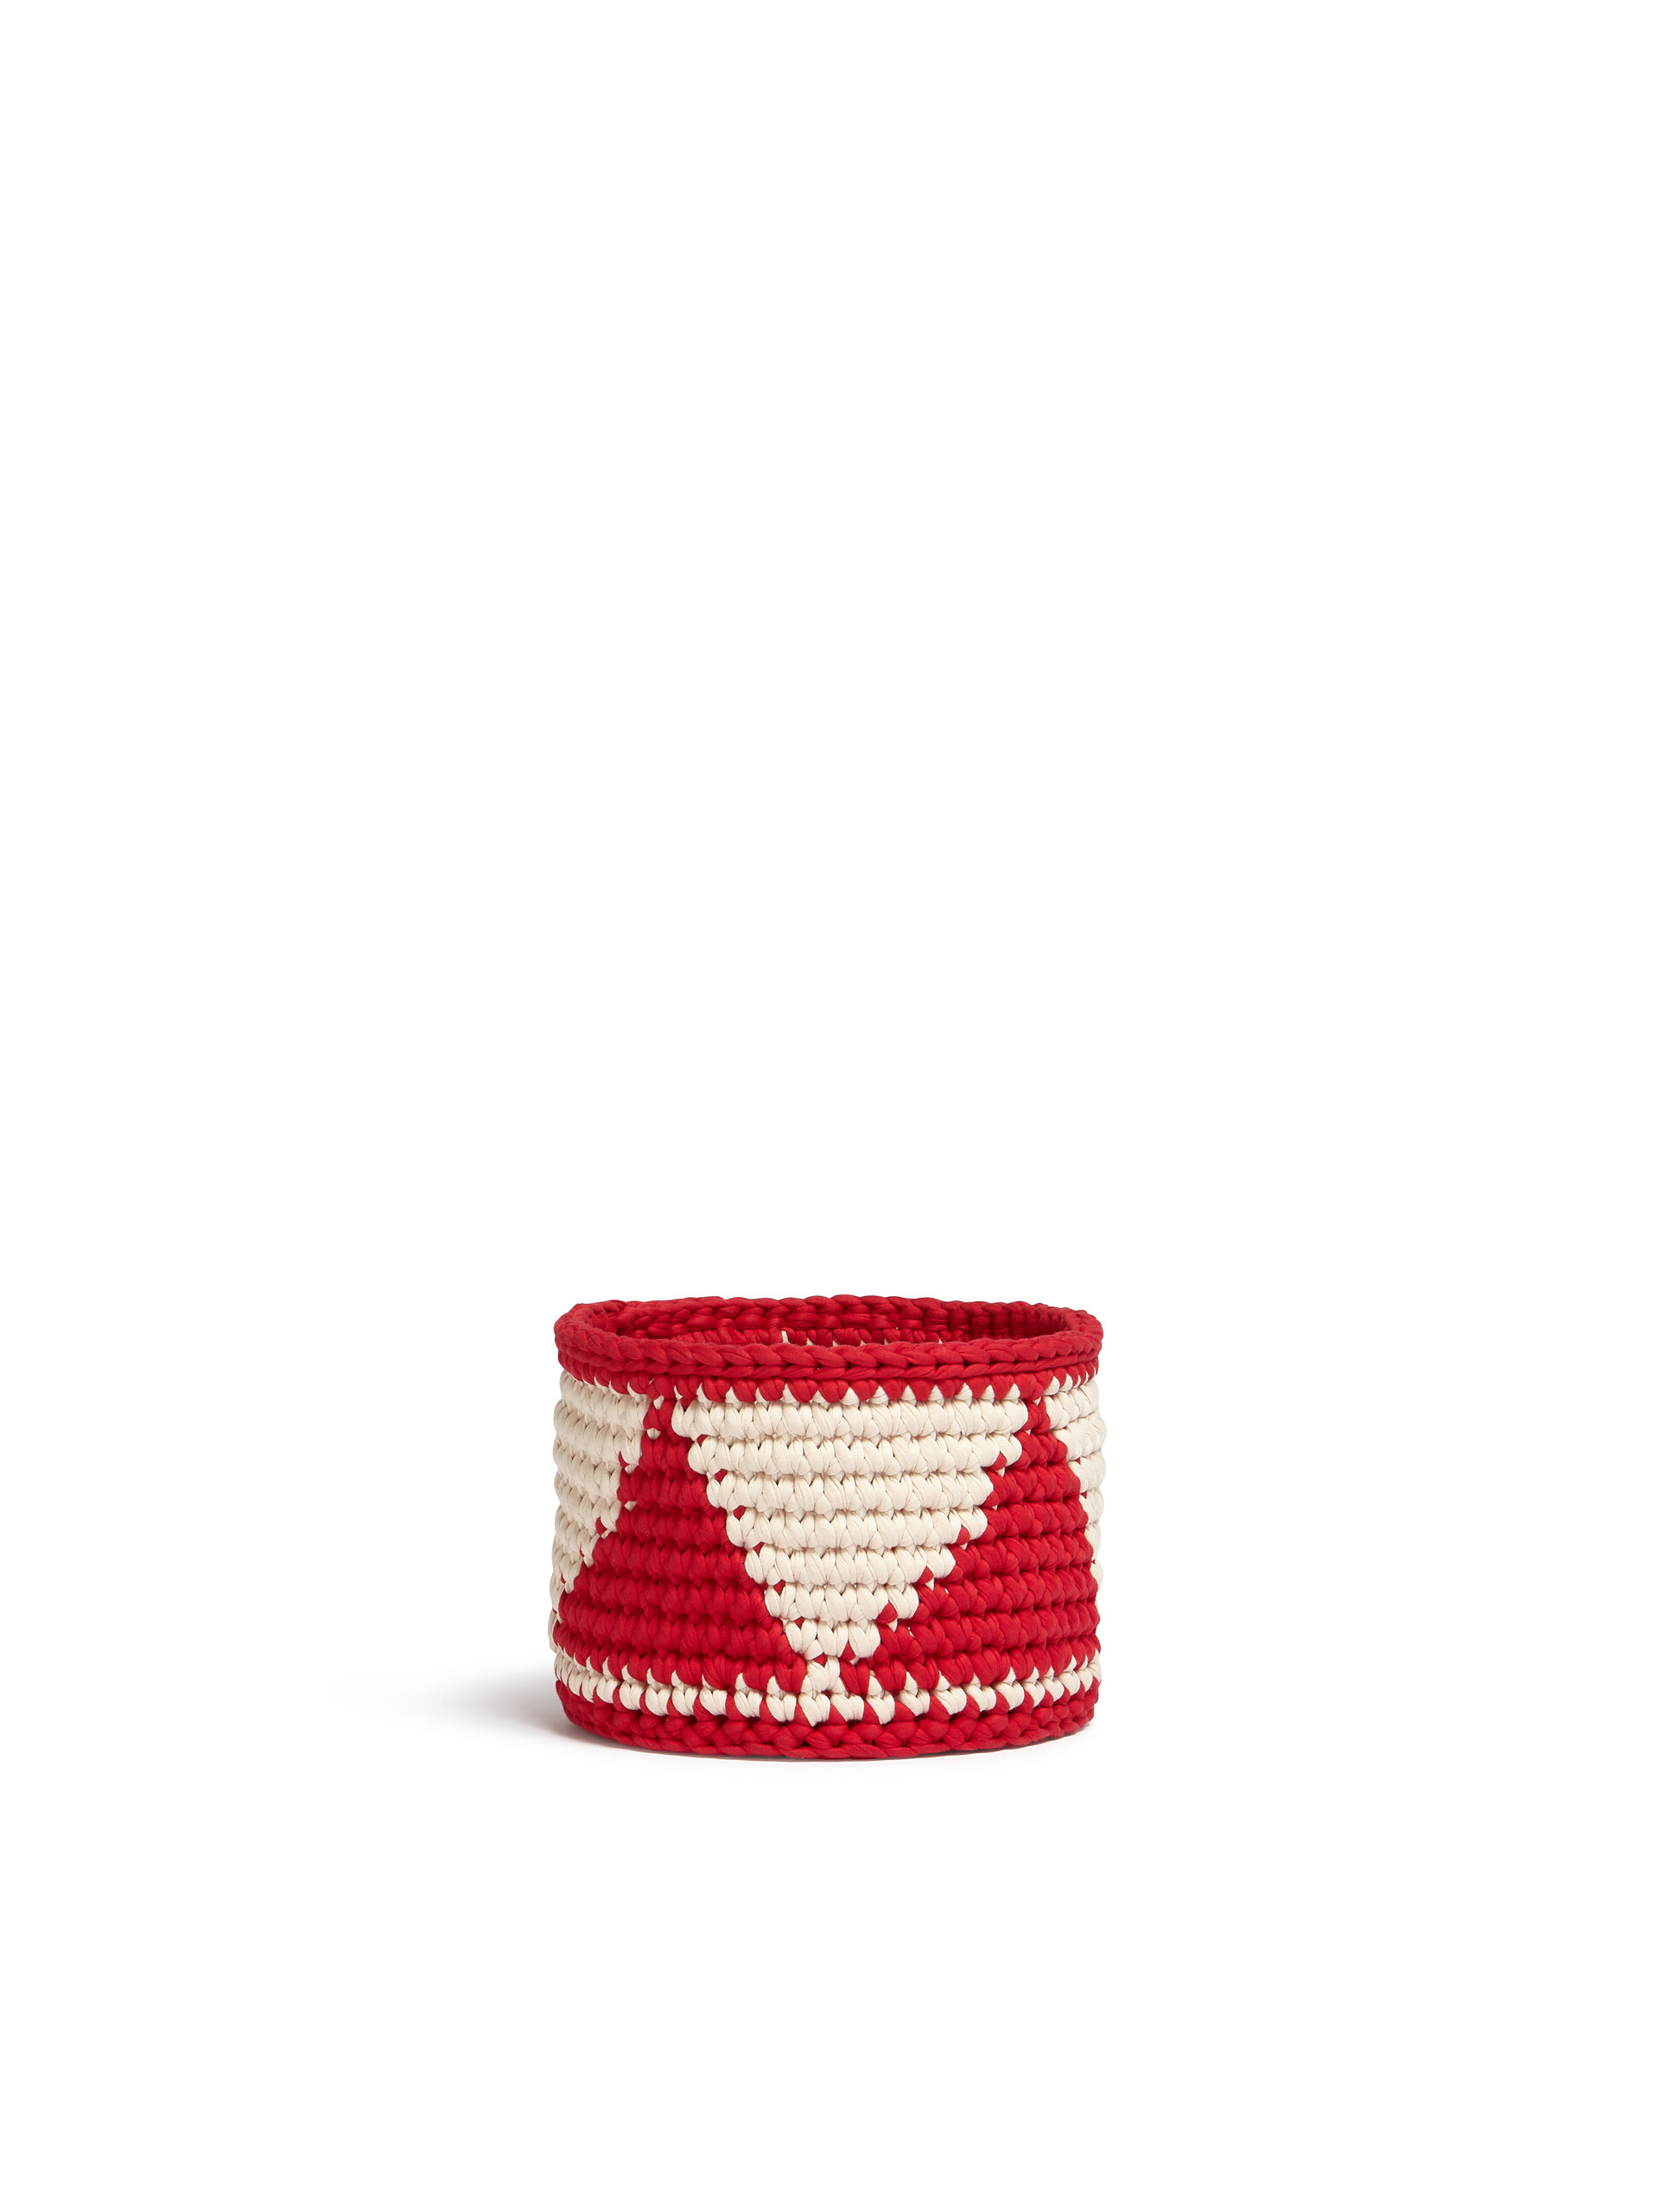 Small MARNI MARKET vase holder in white and red crochet - Furniture - Image 2